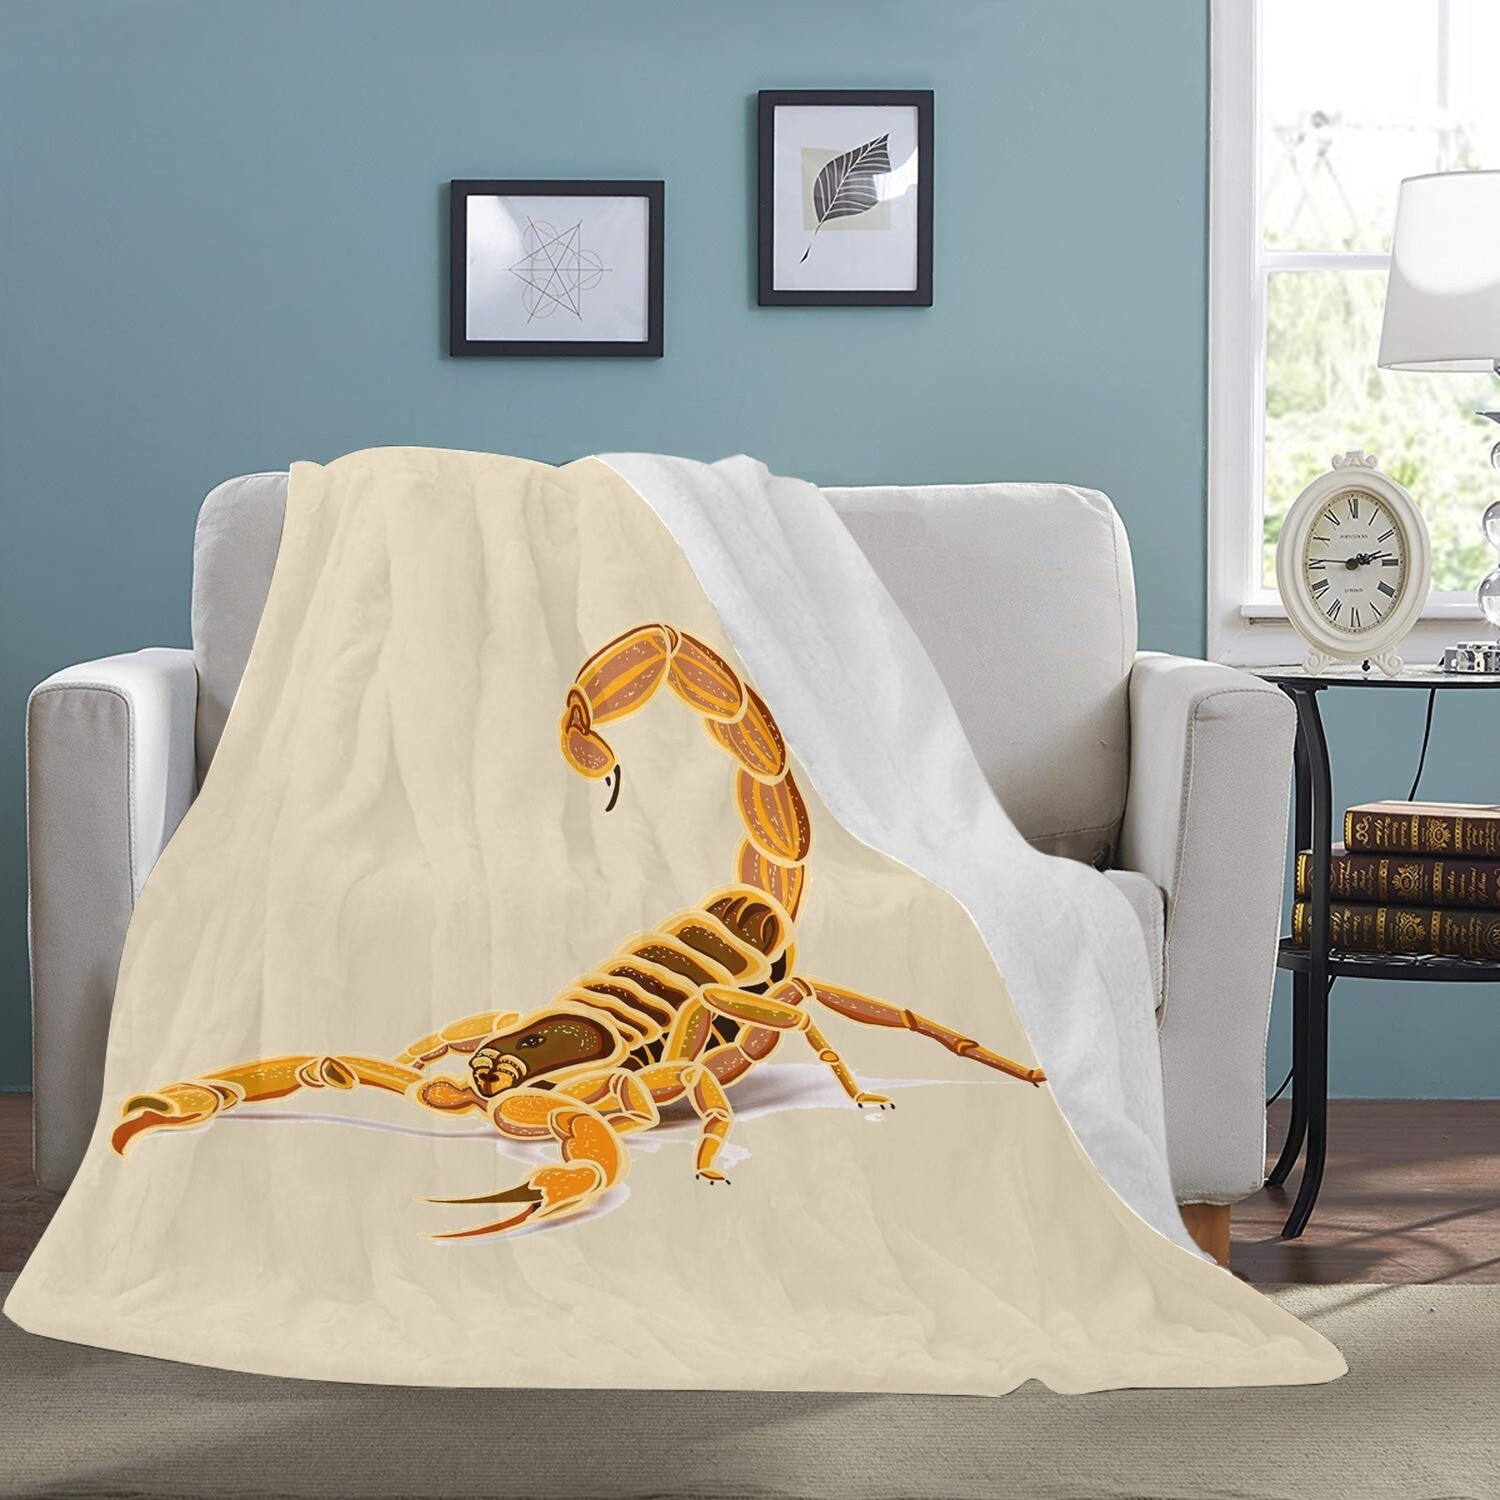 🤴🏽👸🏽🦂Large Ultra-Soft Micro Fleece Blanket Scorpio Scorpion Zodiac Astrological sign by Maru, gift, gift for her, gift for him, gift for them, 70"x80", sand